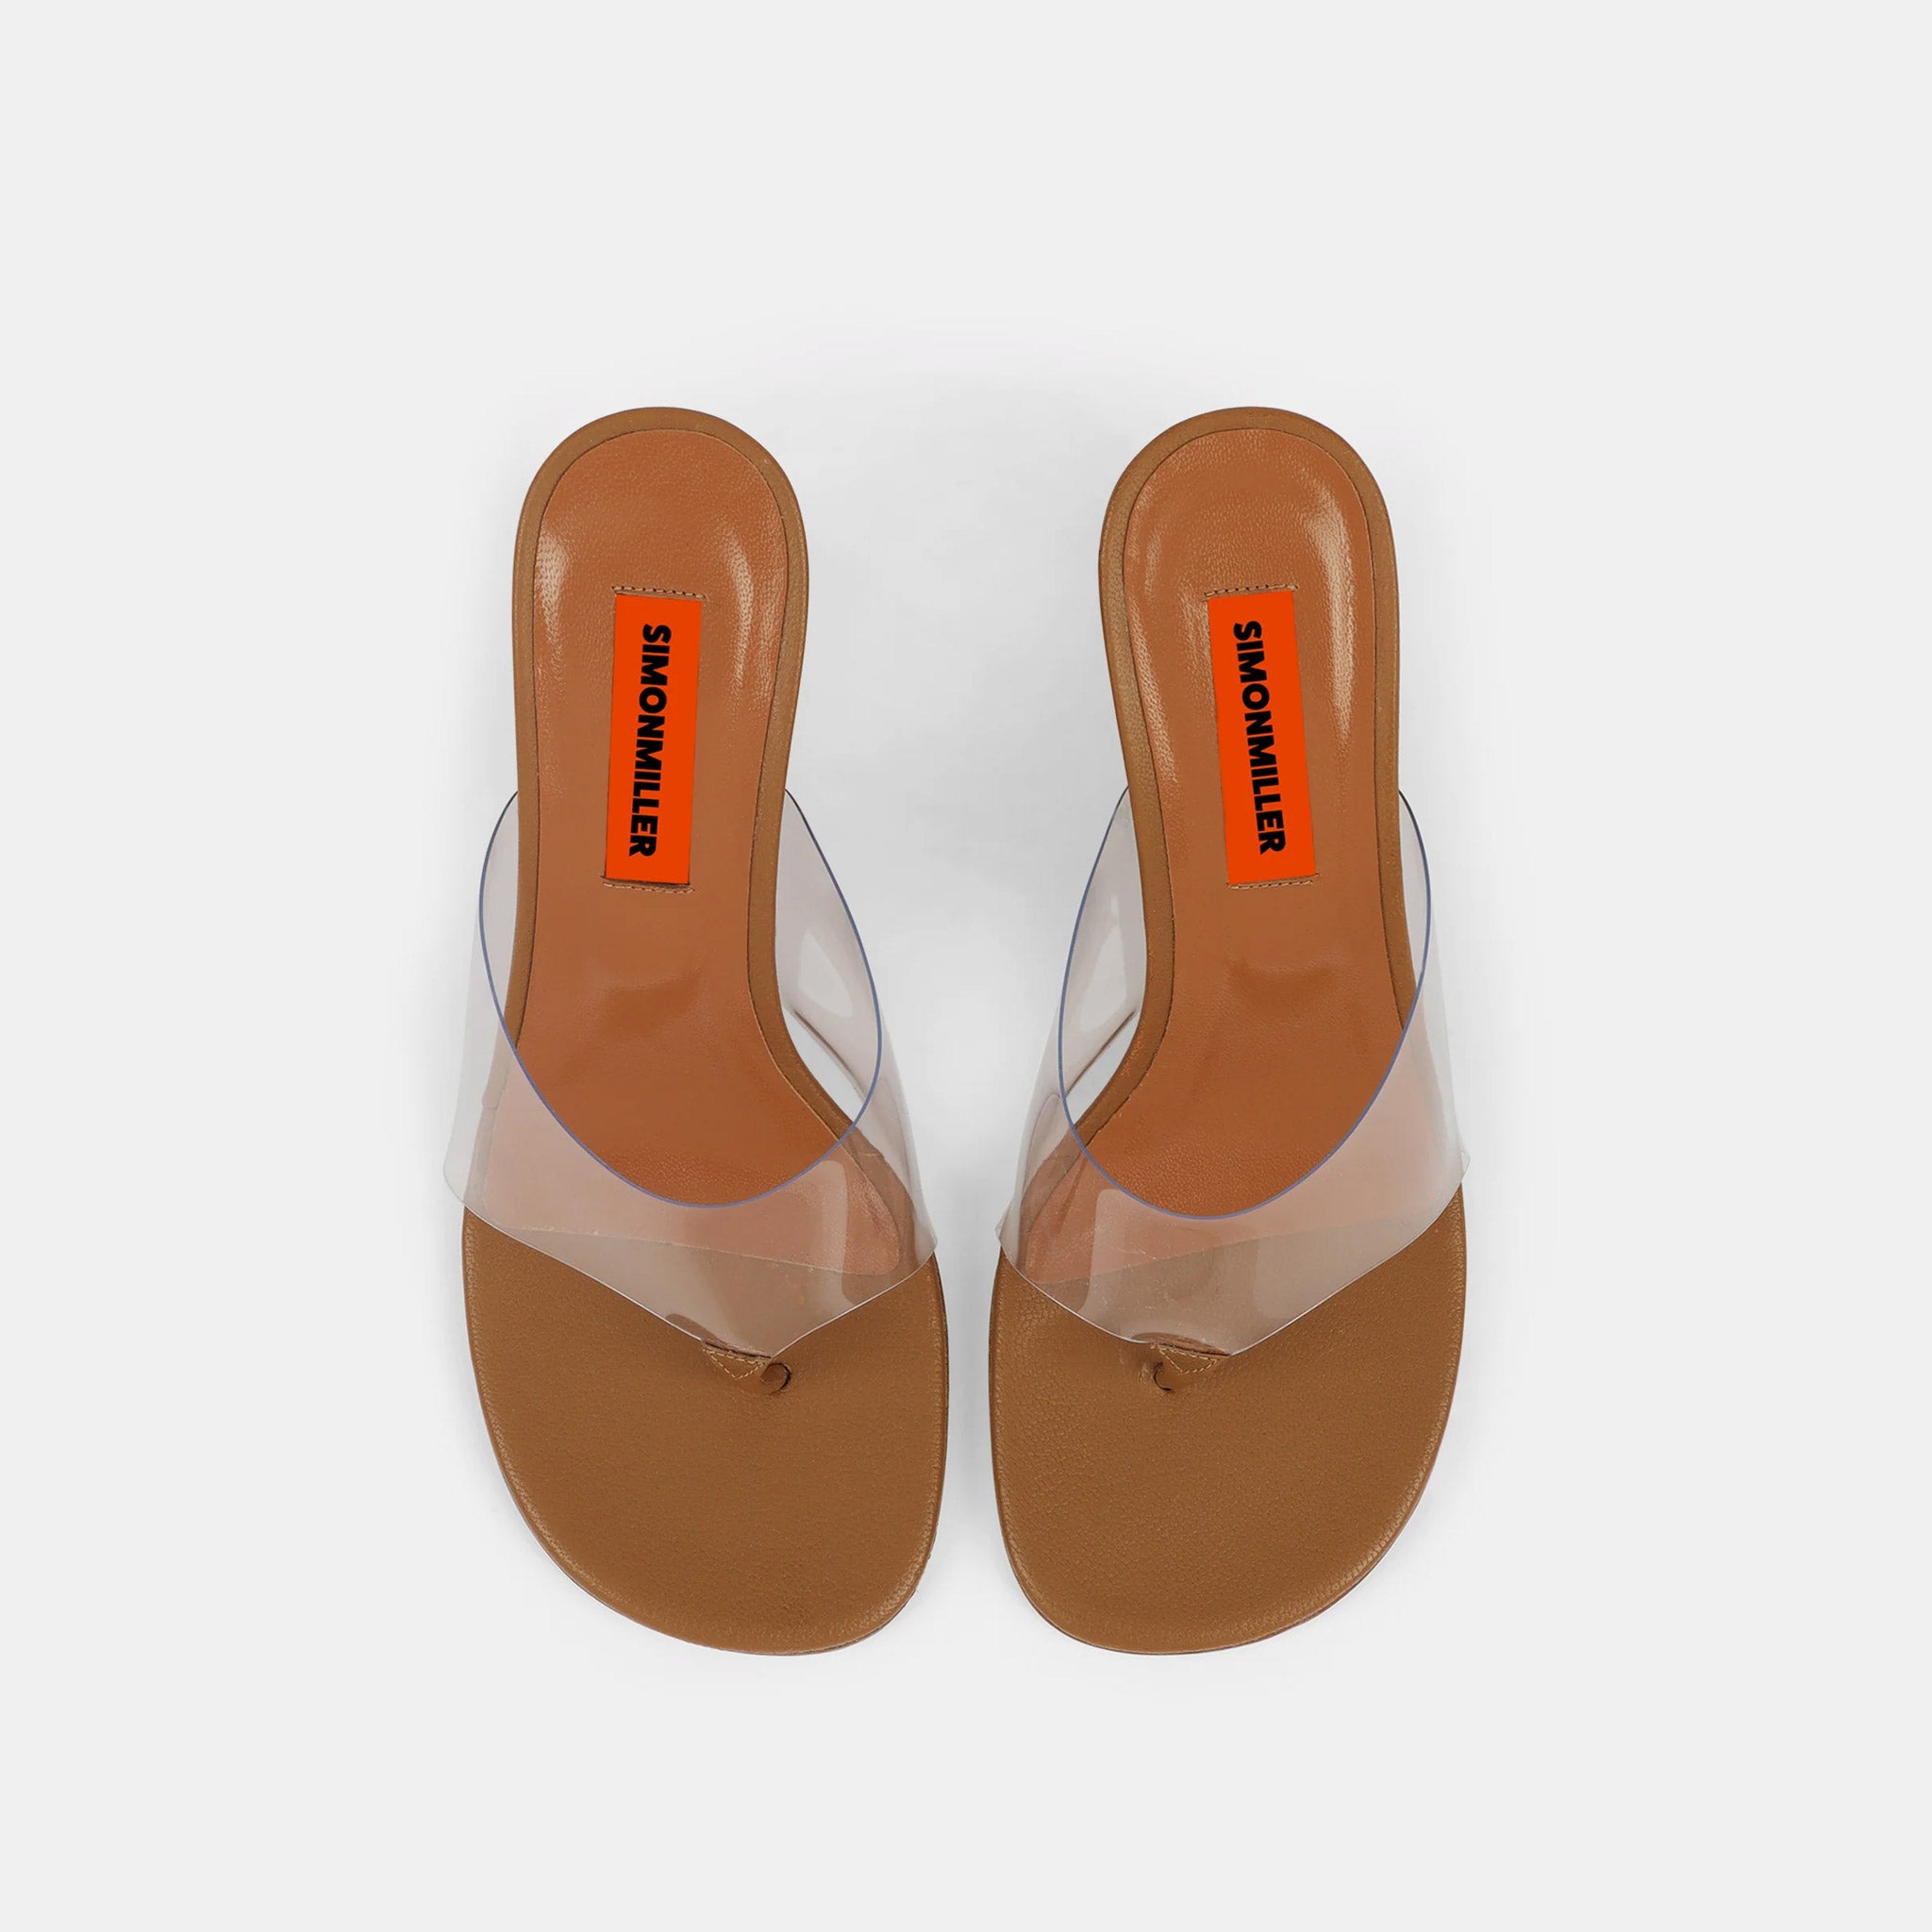 Top down view of a high heel wedge sandal with clear PVC upper and thong detail, in toffee brown vegan leather.